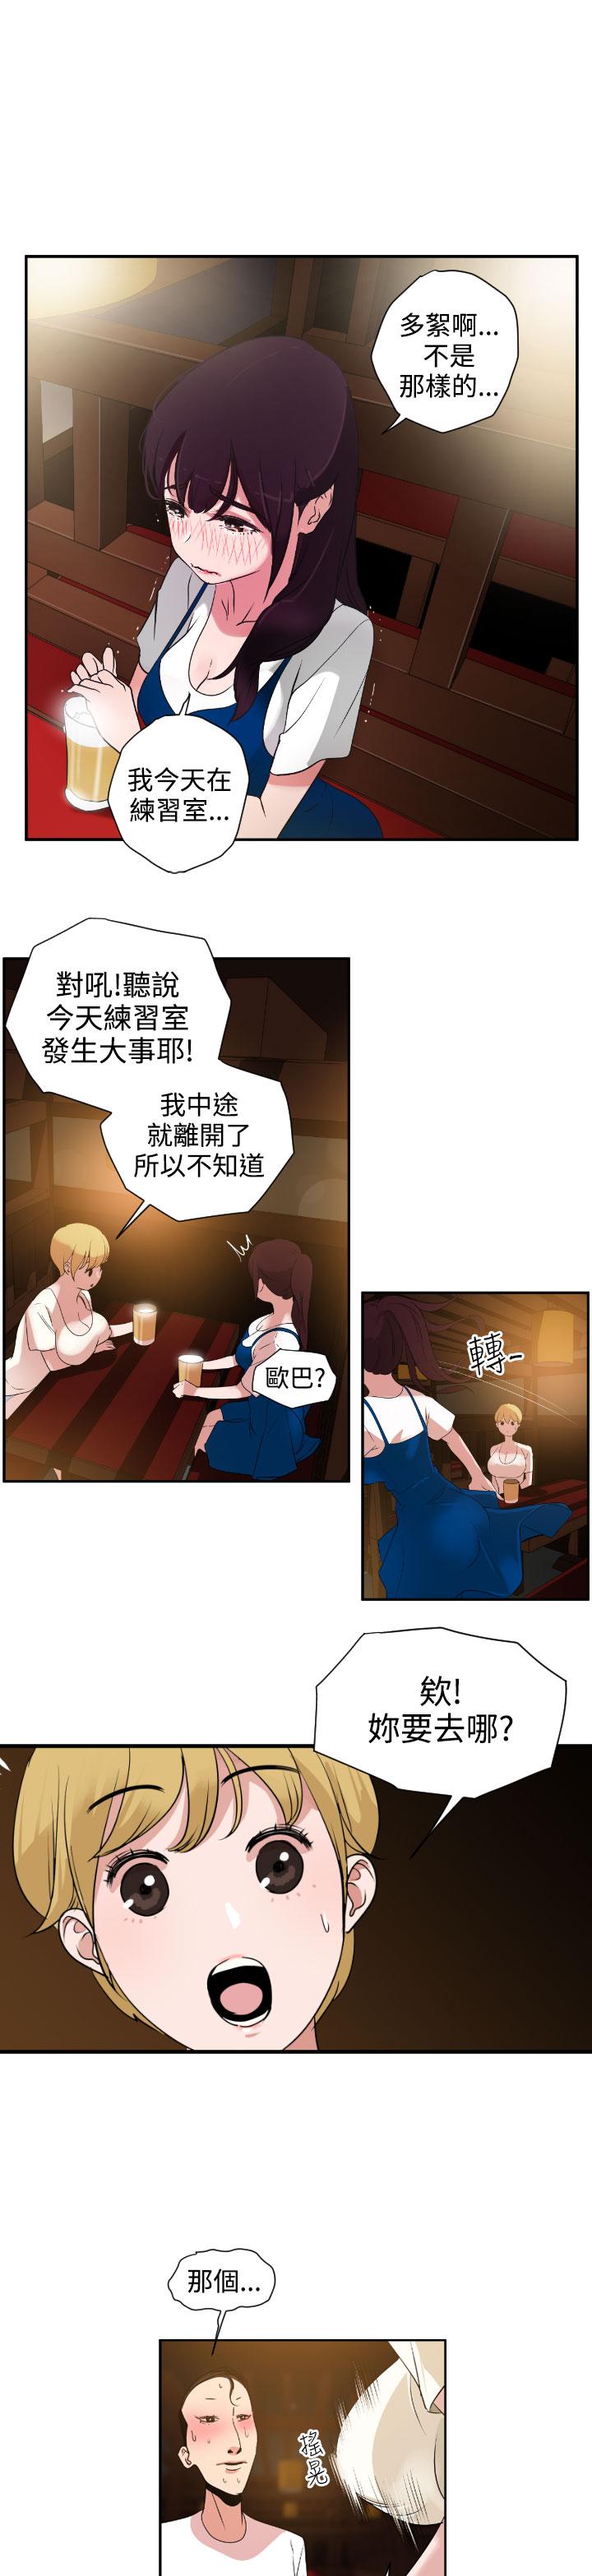 Desire King (慾求王) Ch.1-12 (chinese) 69